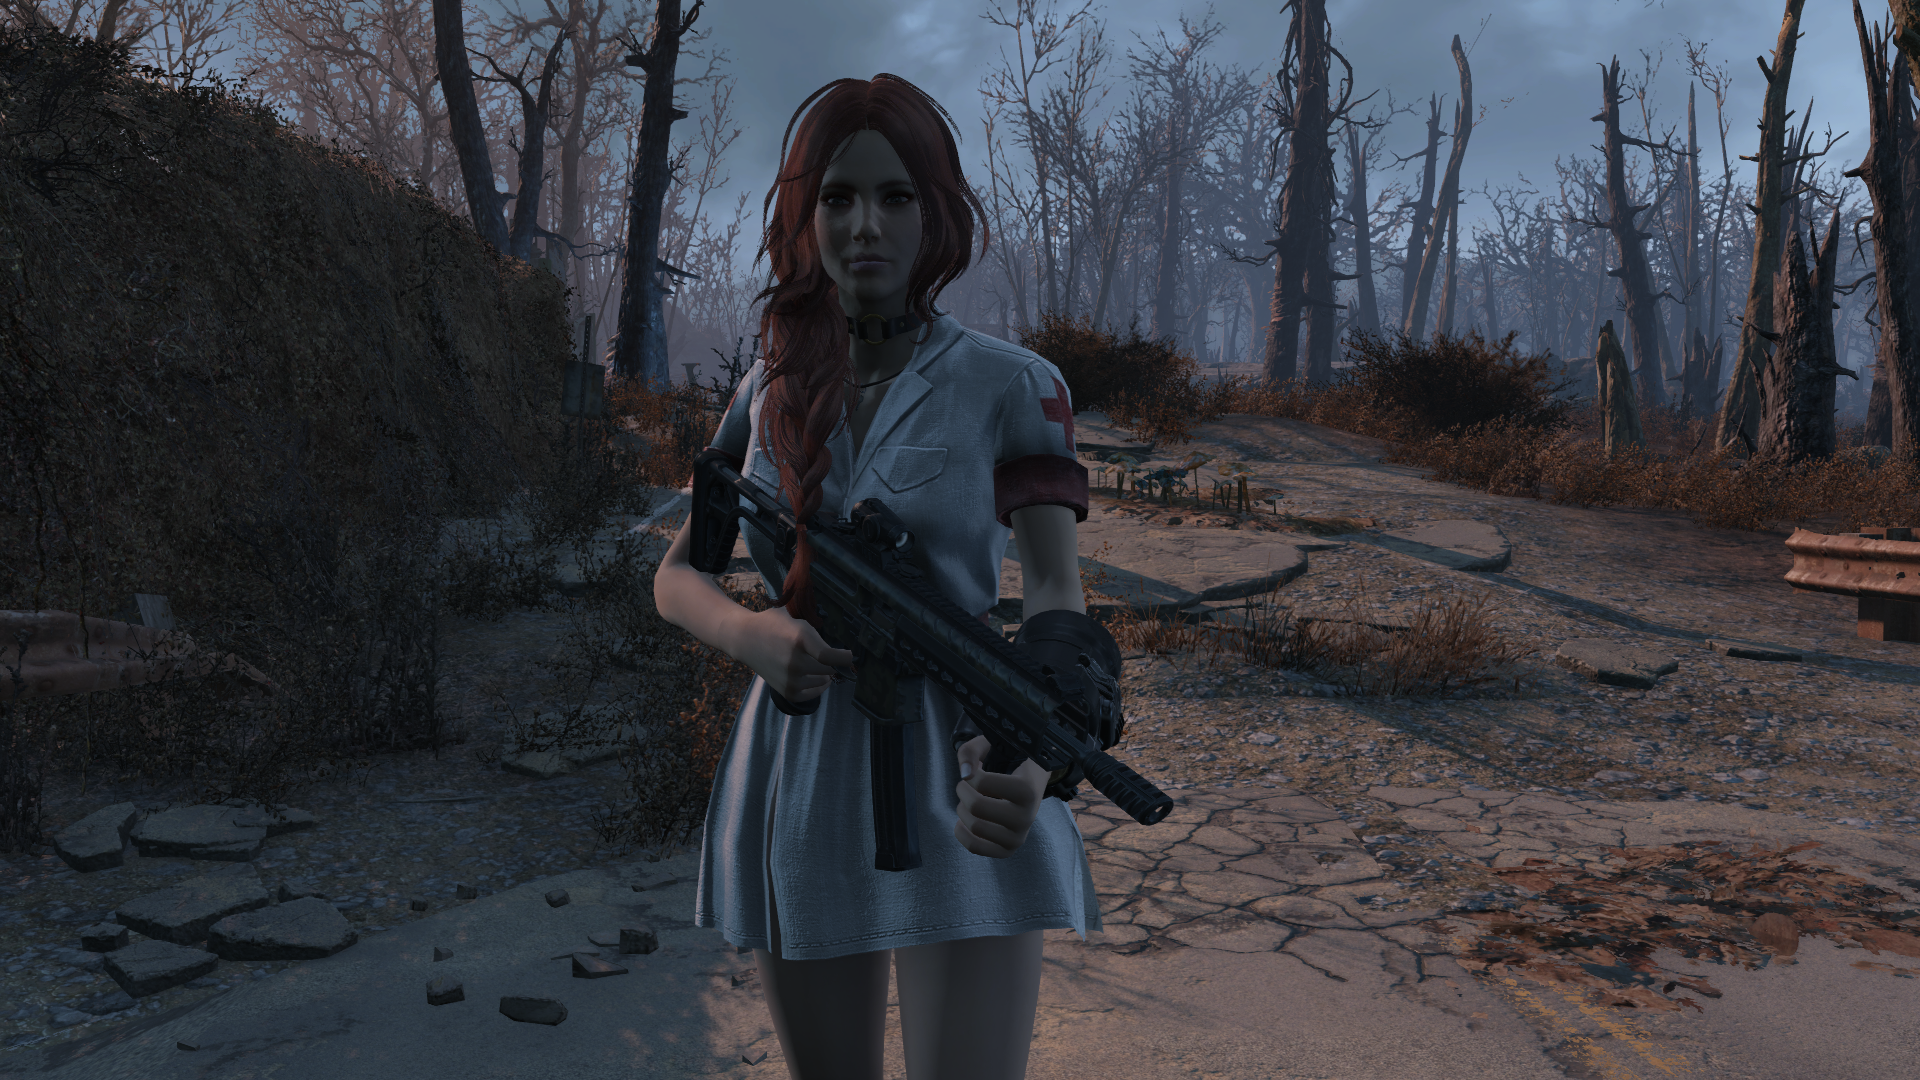 Fallout 4 PC Gaming Video Games Women Futuristic Apocalyptic Screen Shot Modding Bethesda Softworks 1920x1080